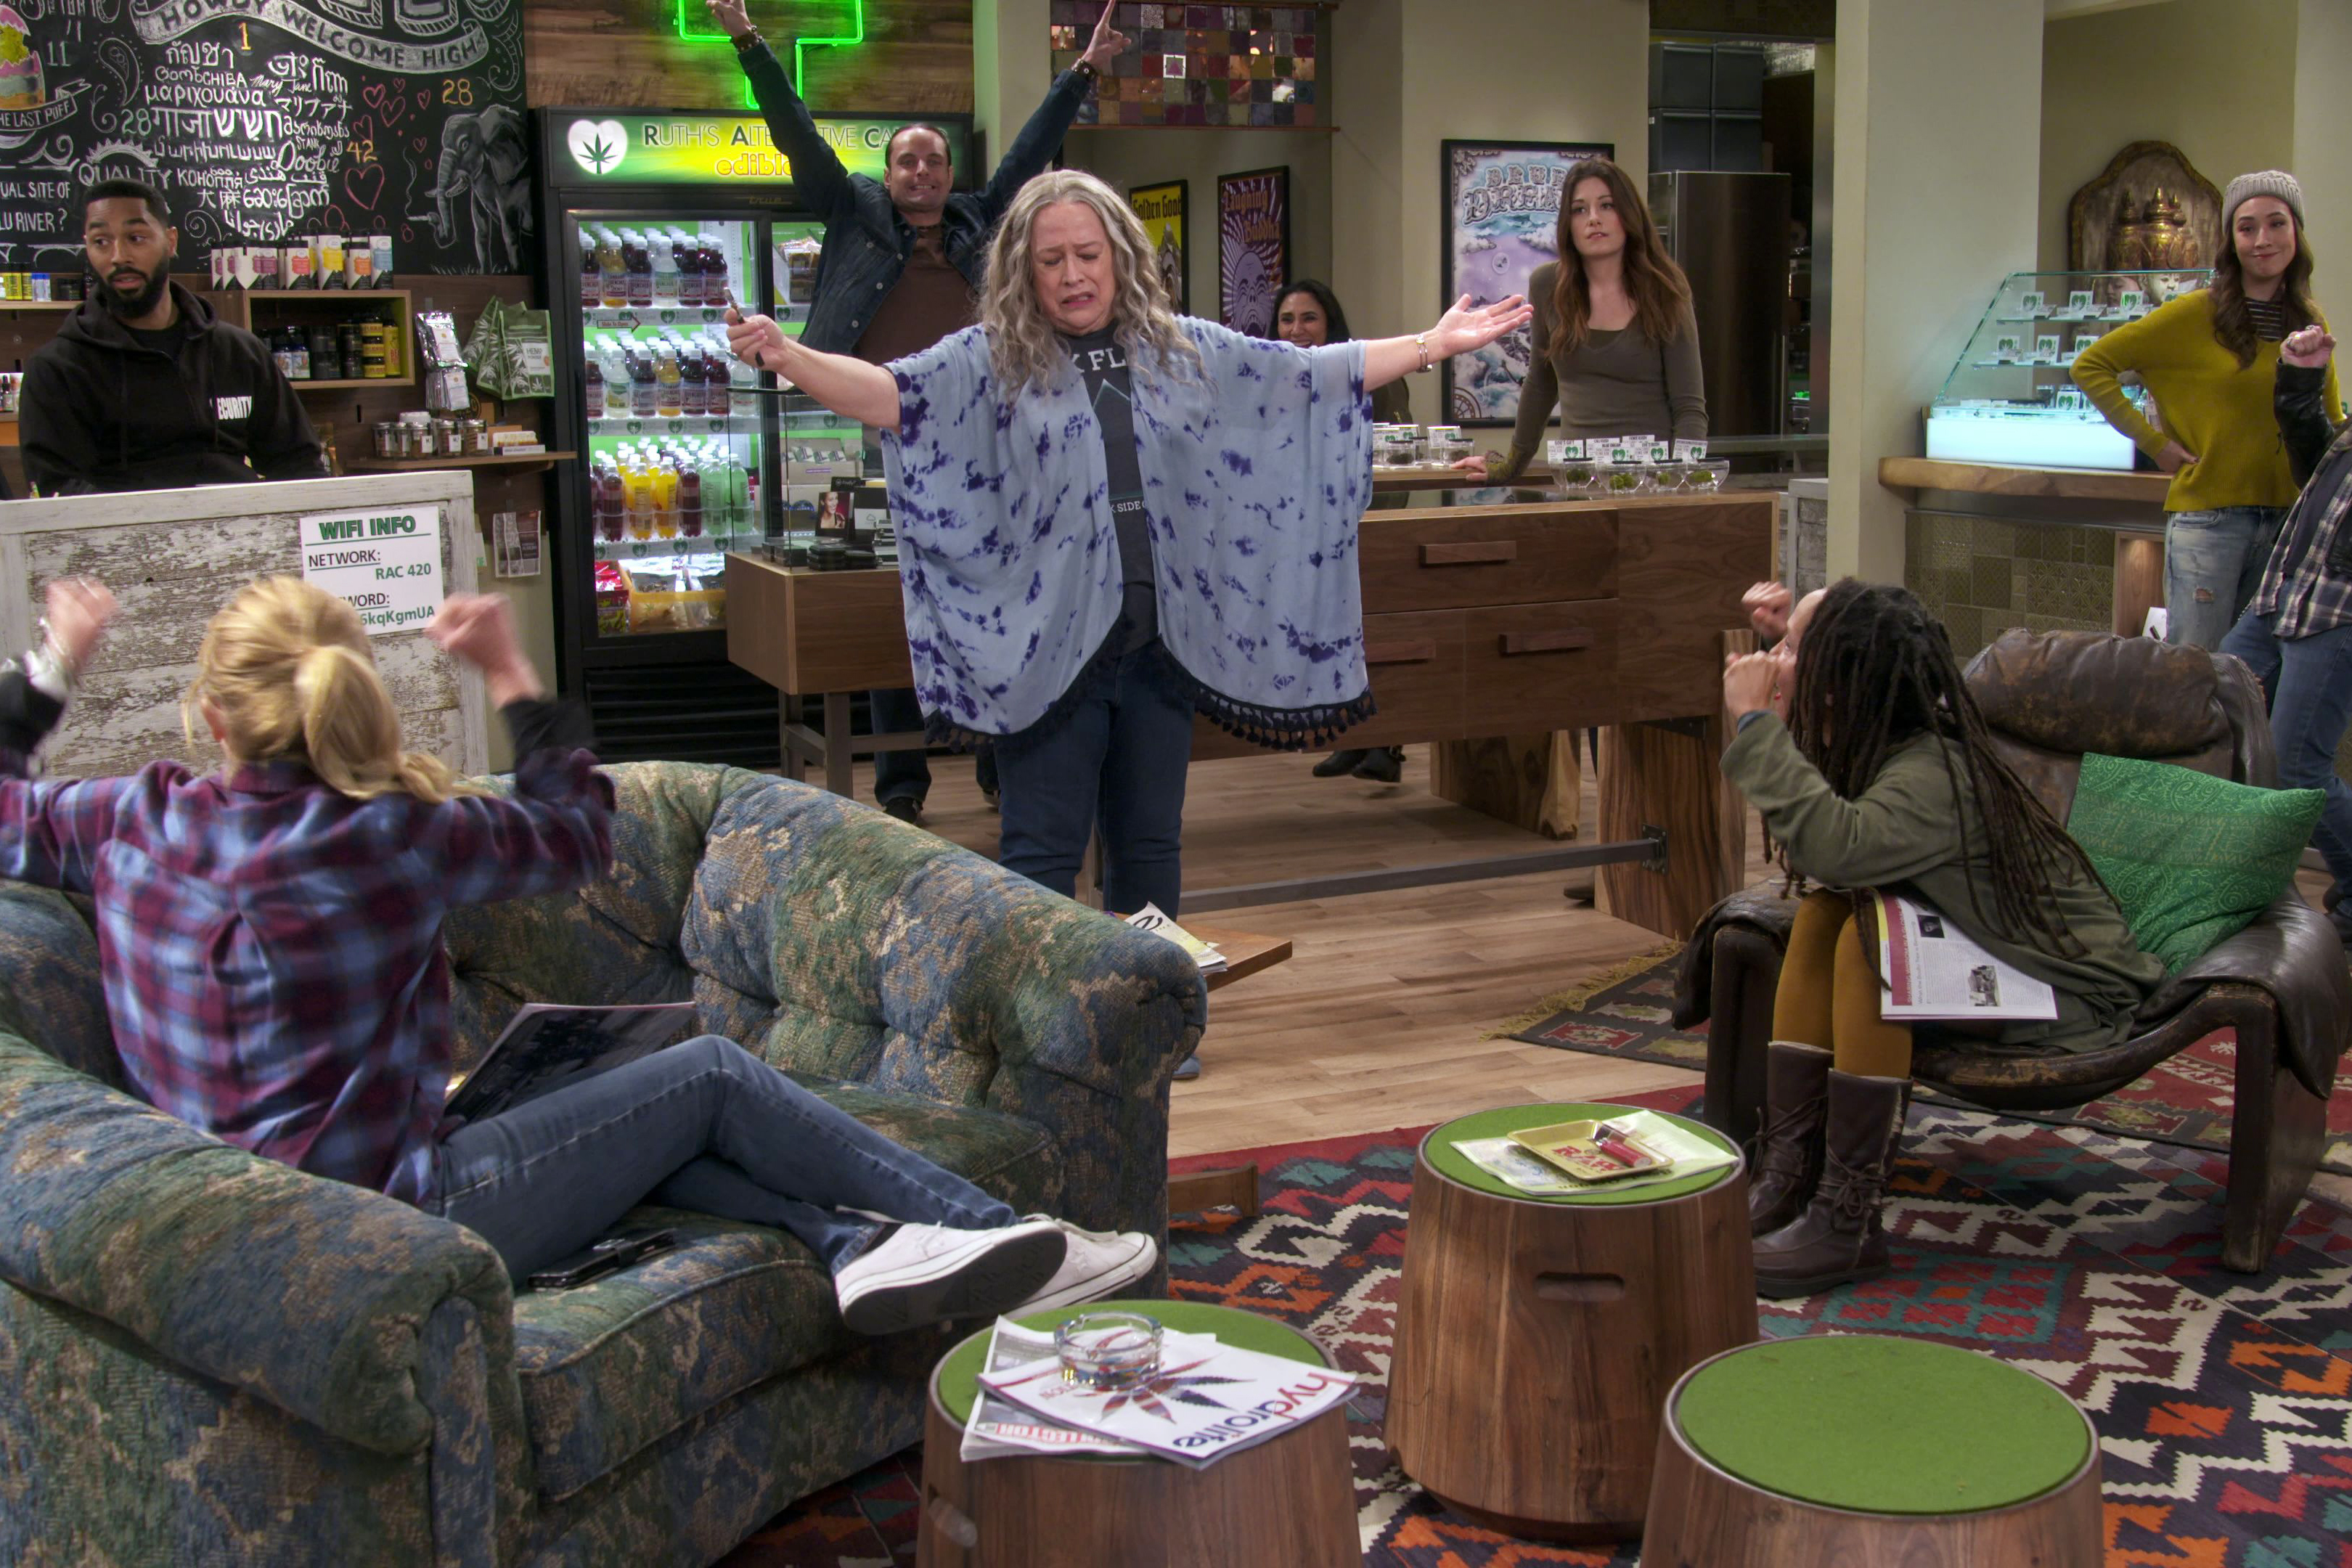 Disjointed: Kathy Bates Offers Free Joints in New Netflix Series Preview - canceled TV ...3240 x 2160